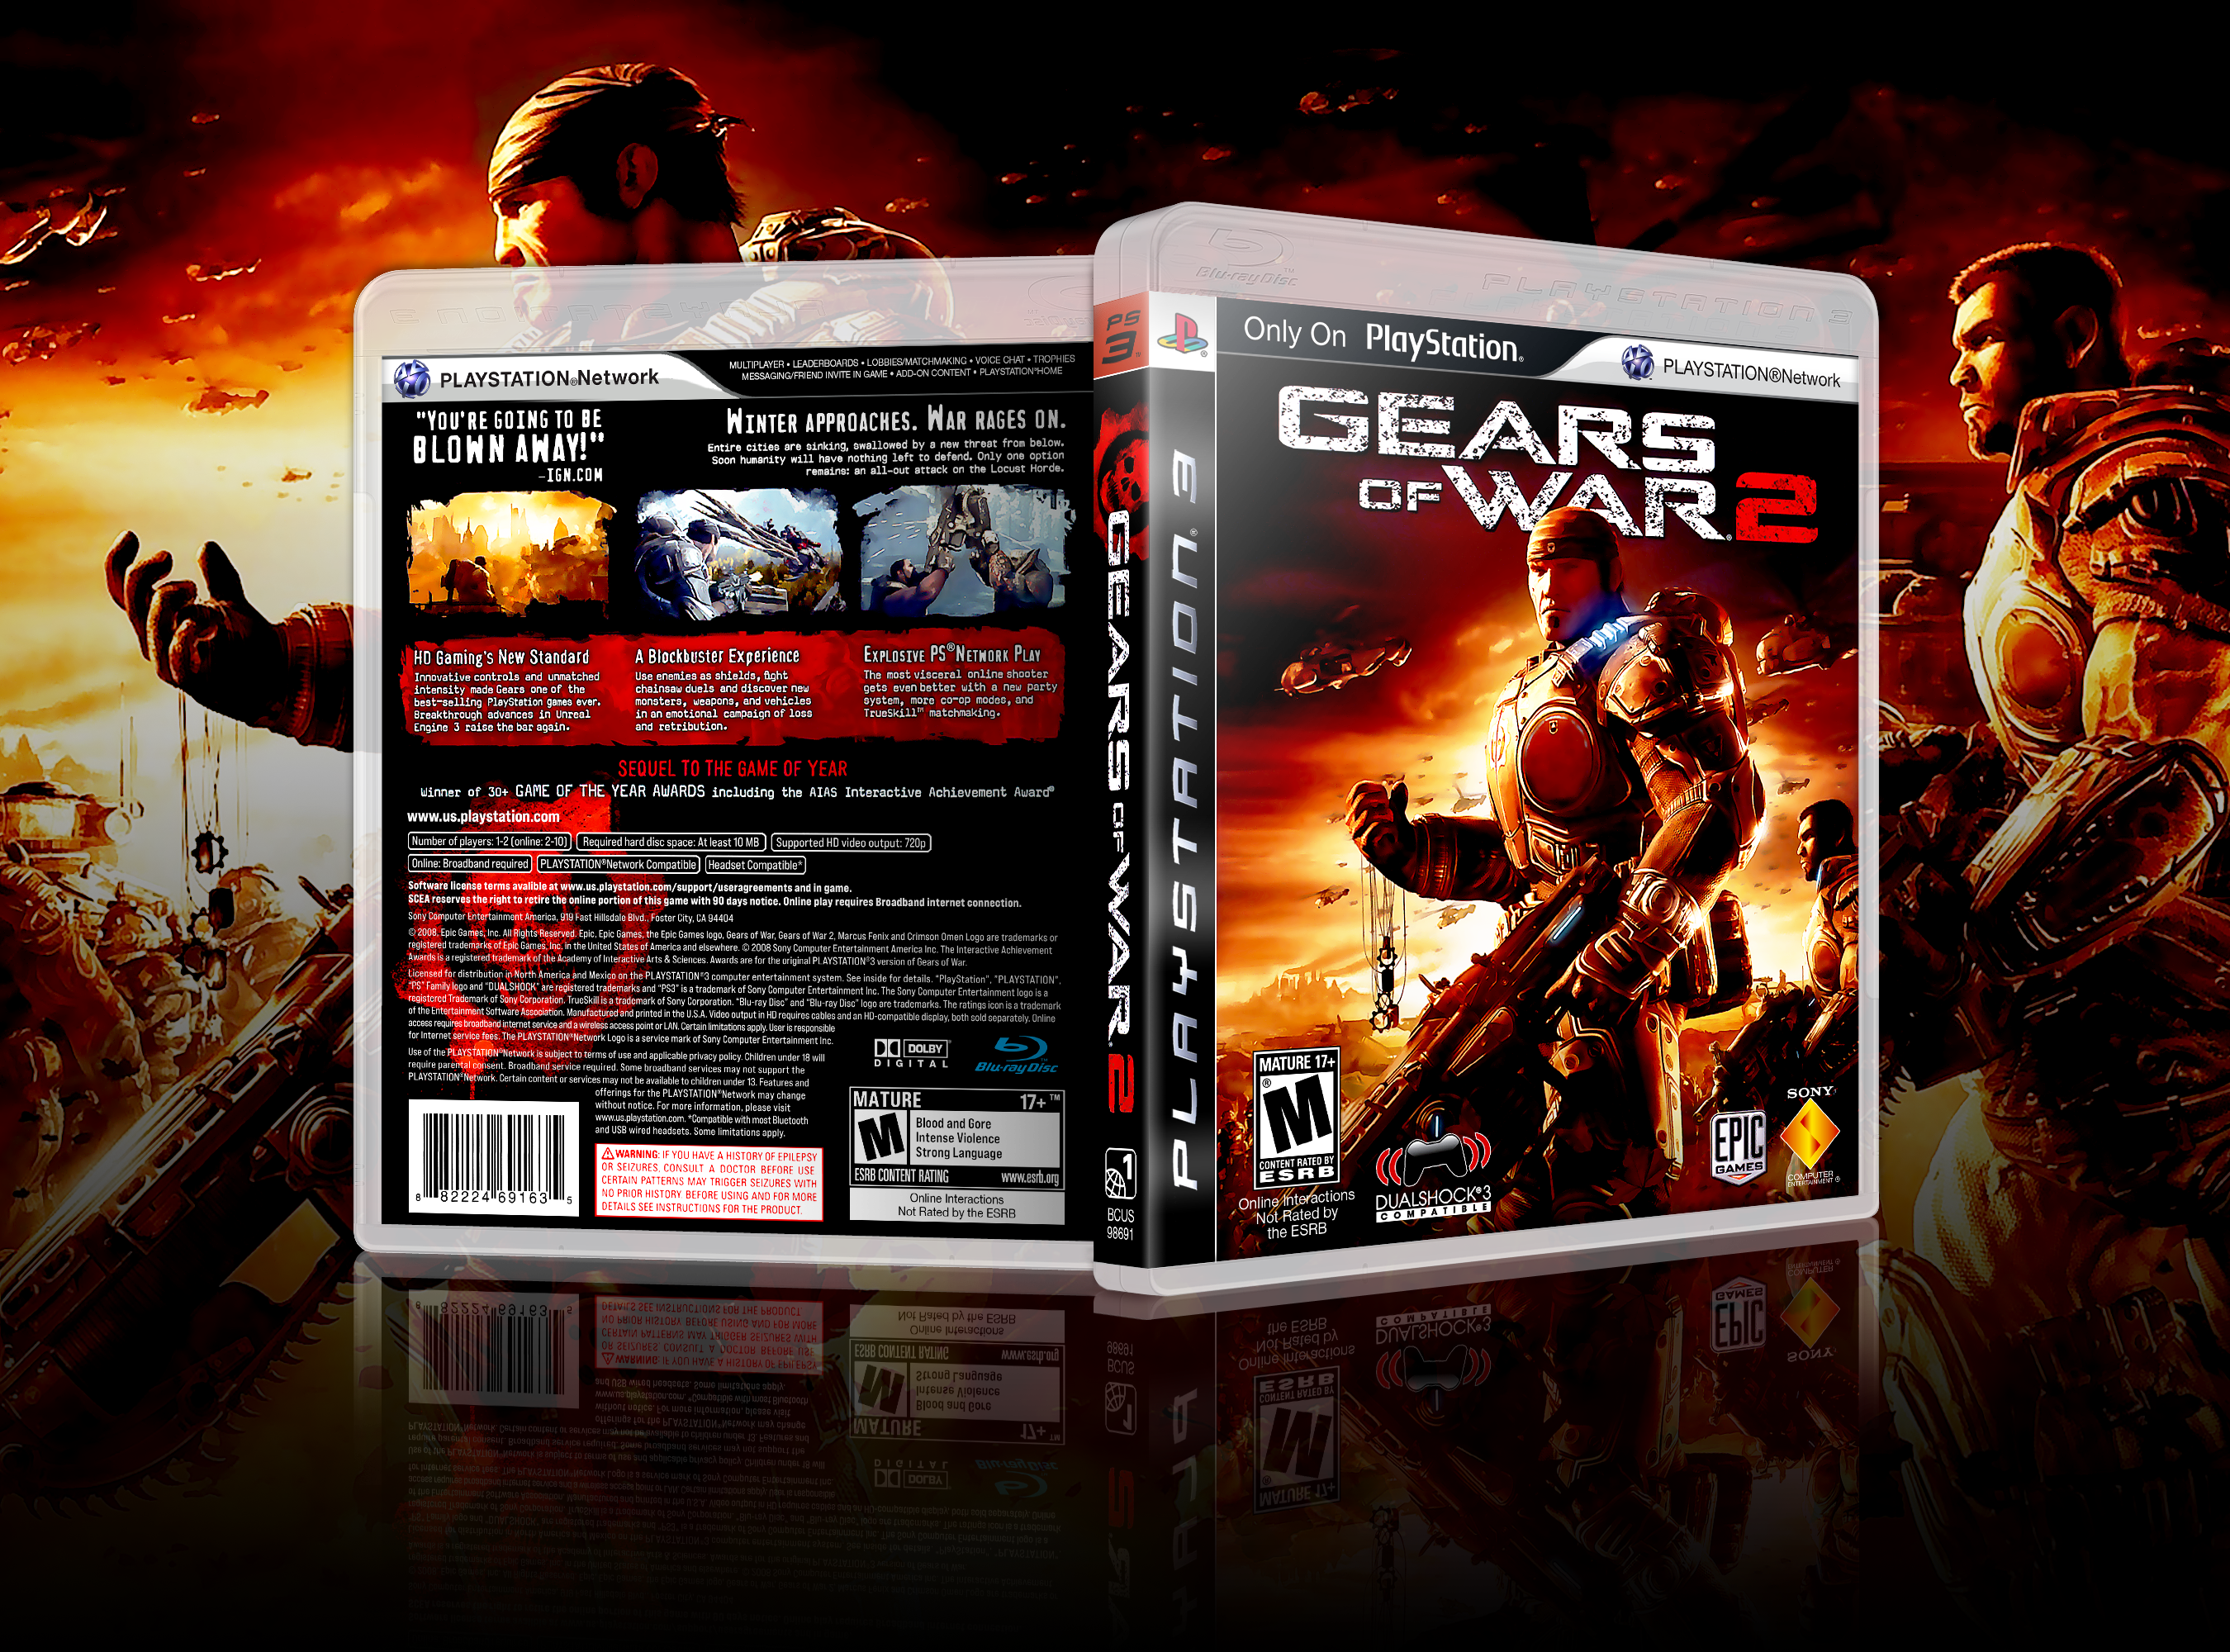 Gears of War 2 box cover